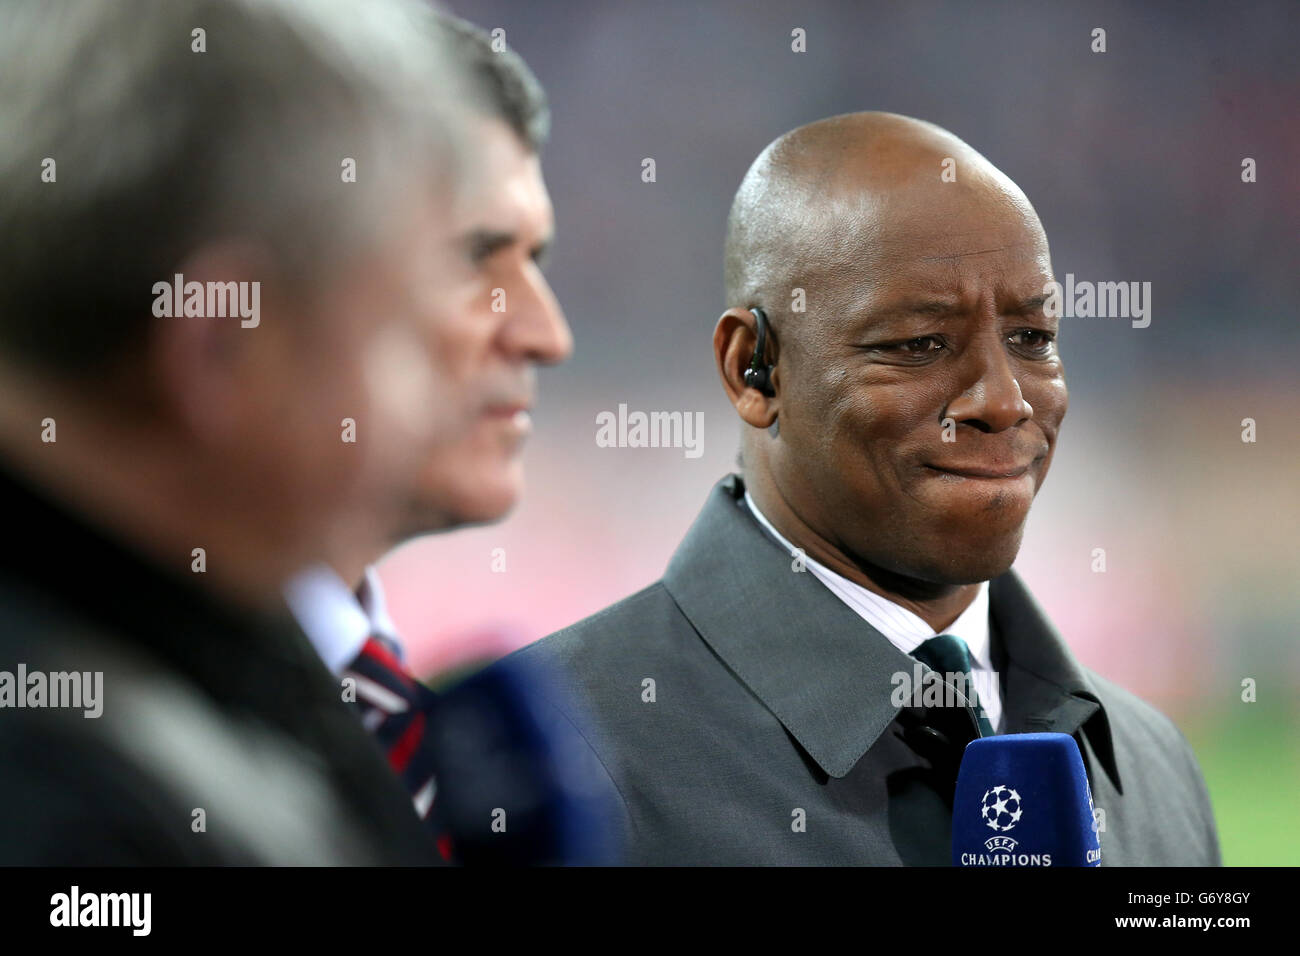 Soccer - UEFA Champions League - Round of 16 - Second Leg - Bayern Munich v Arsenal - Allianz Arena. ITV Sport pundit Ian Wright reacts before the game Stock Photo